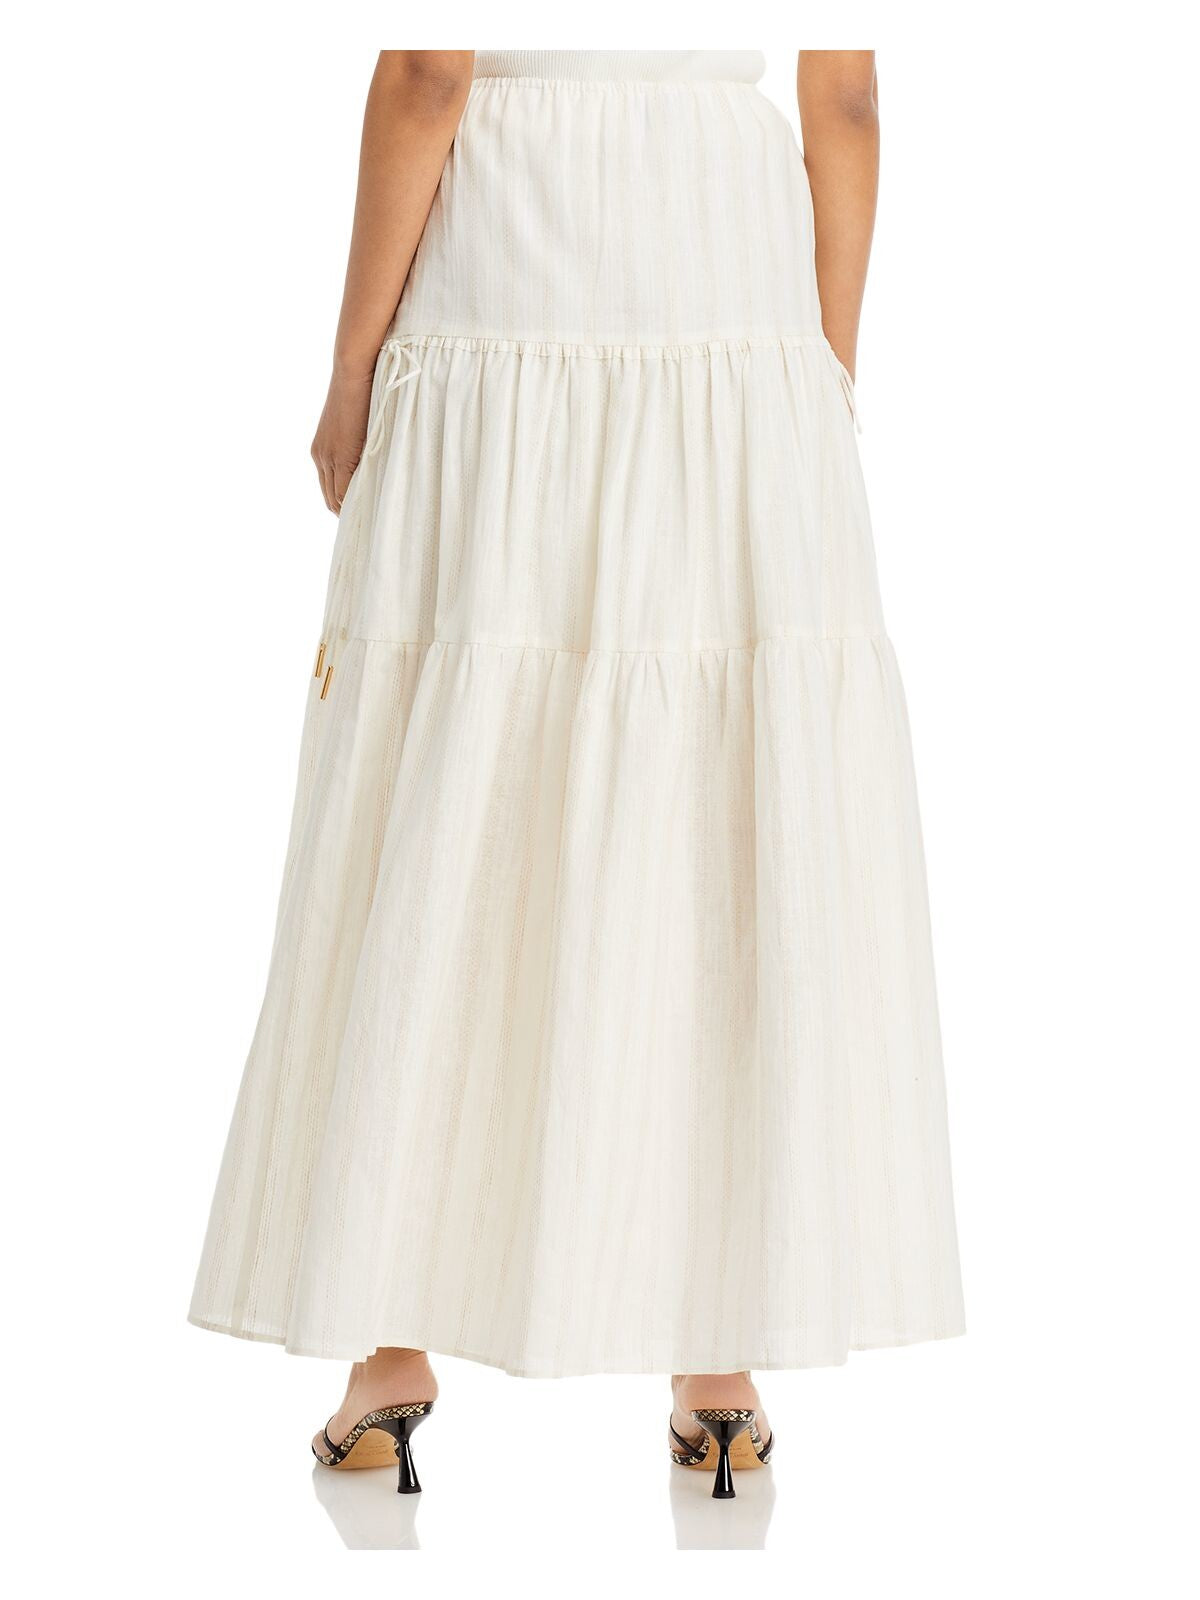 SIGNIFICANT OTHER Womens Ivory Tie Maxi Skirt 10